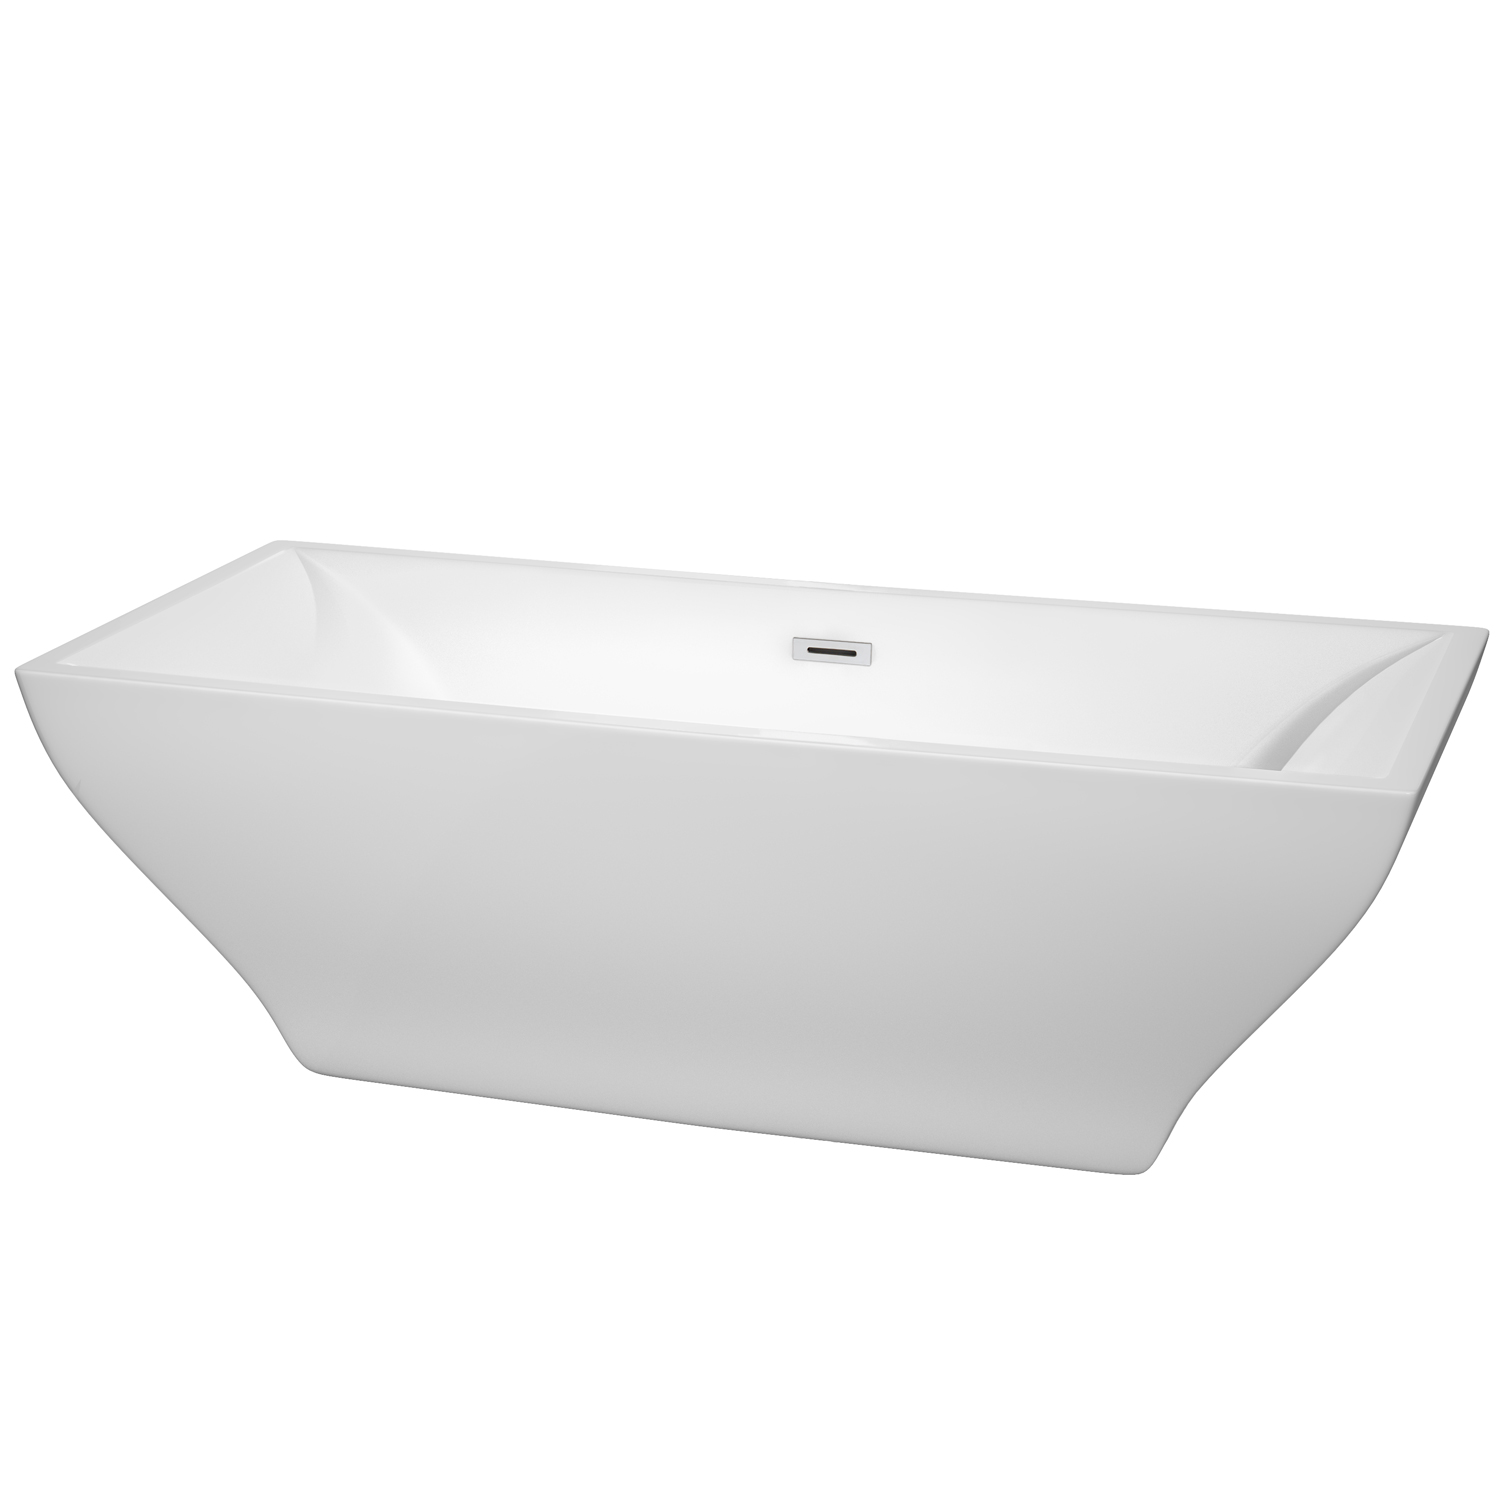 71" Freestanding Bathtub in White with Polished Chrome Drain and Overflow Trim with Faucet Option